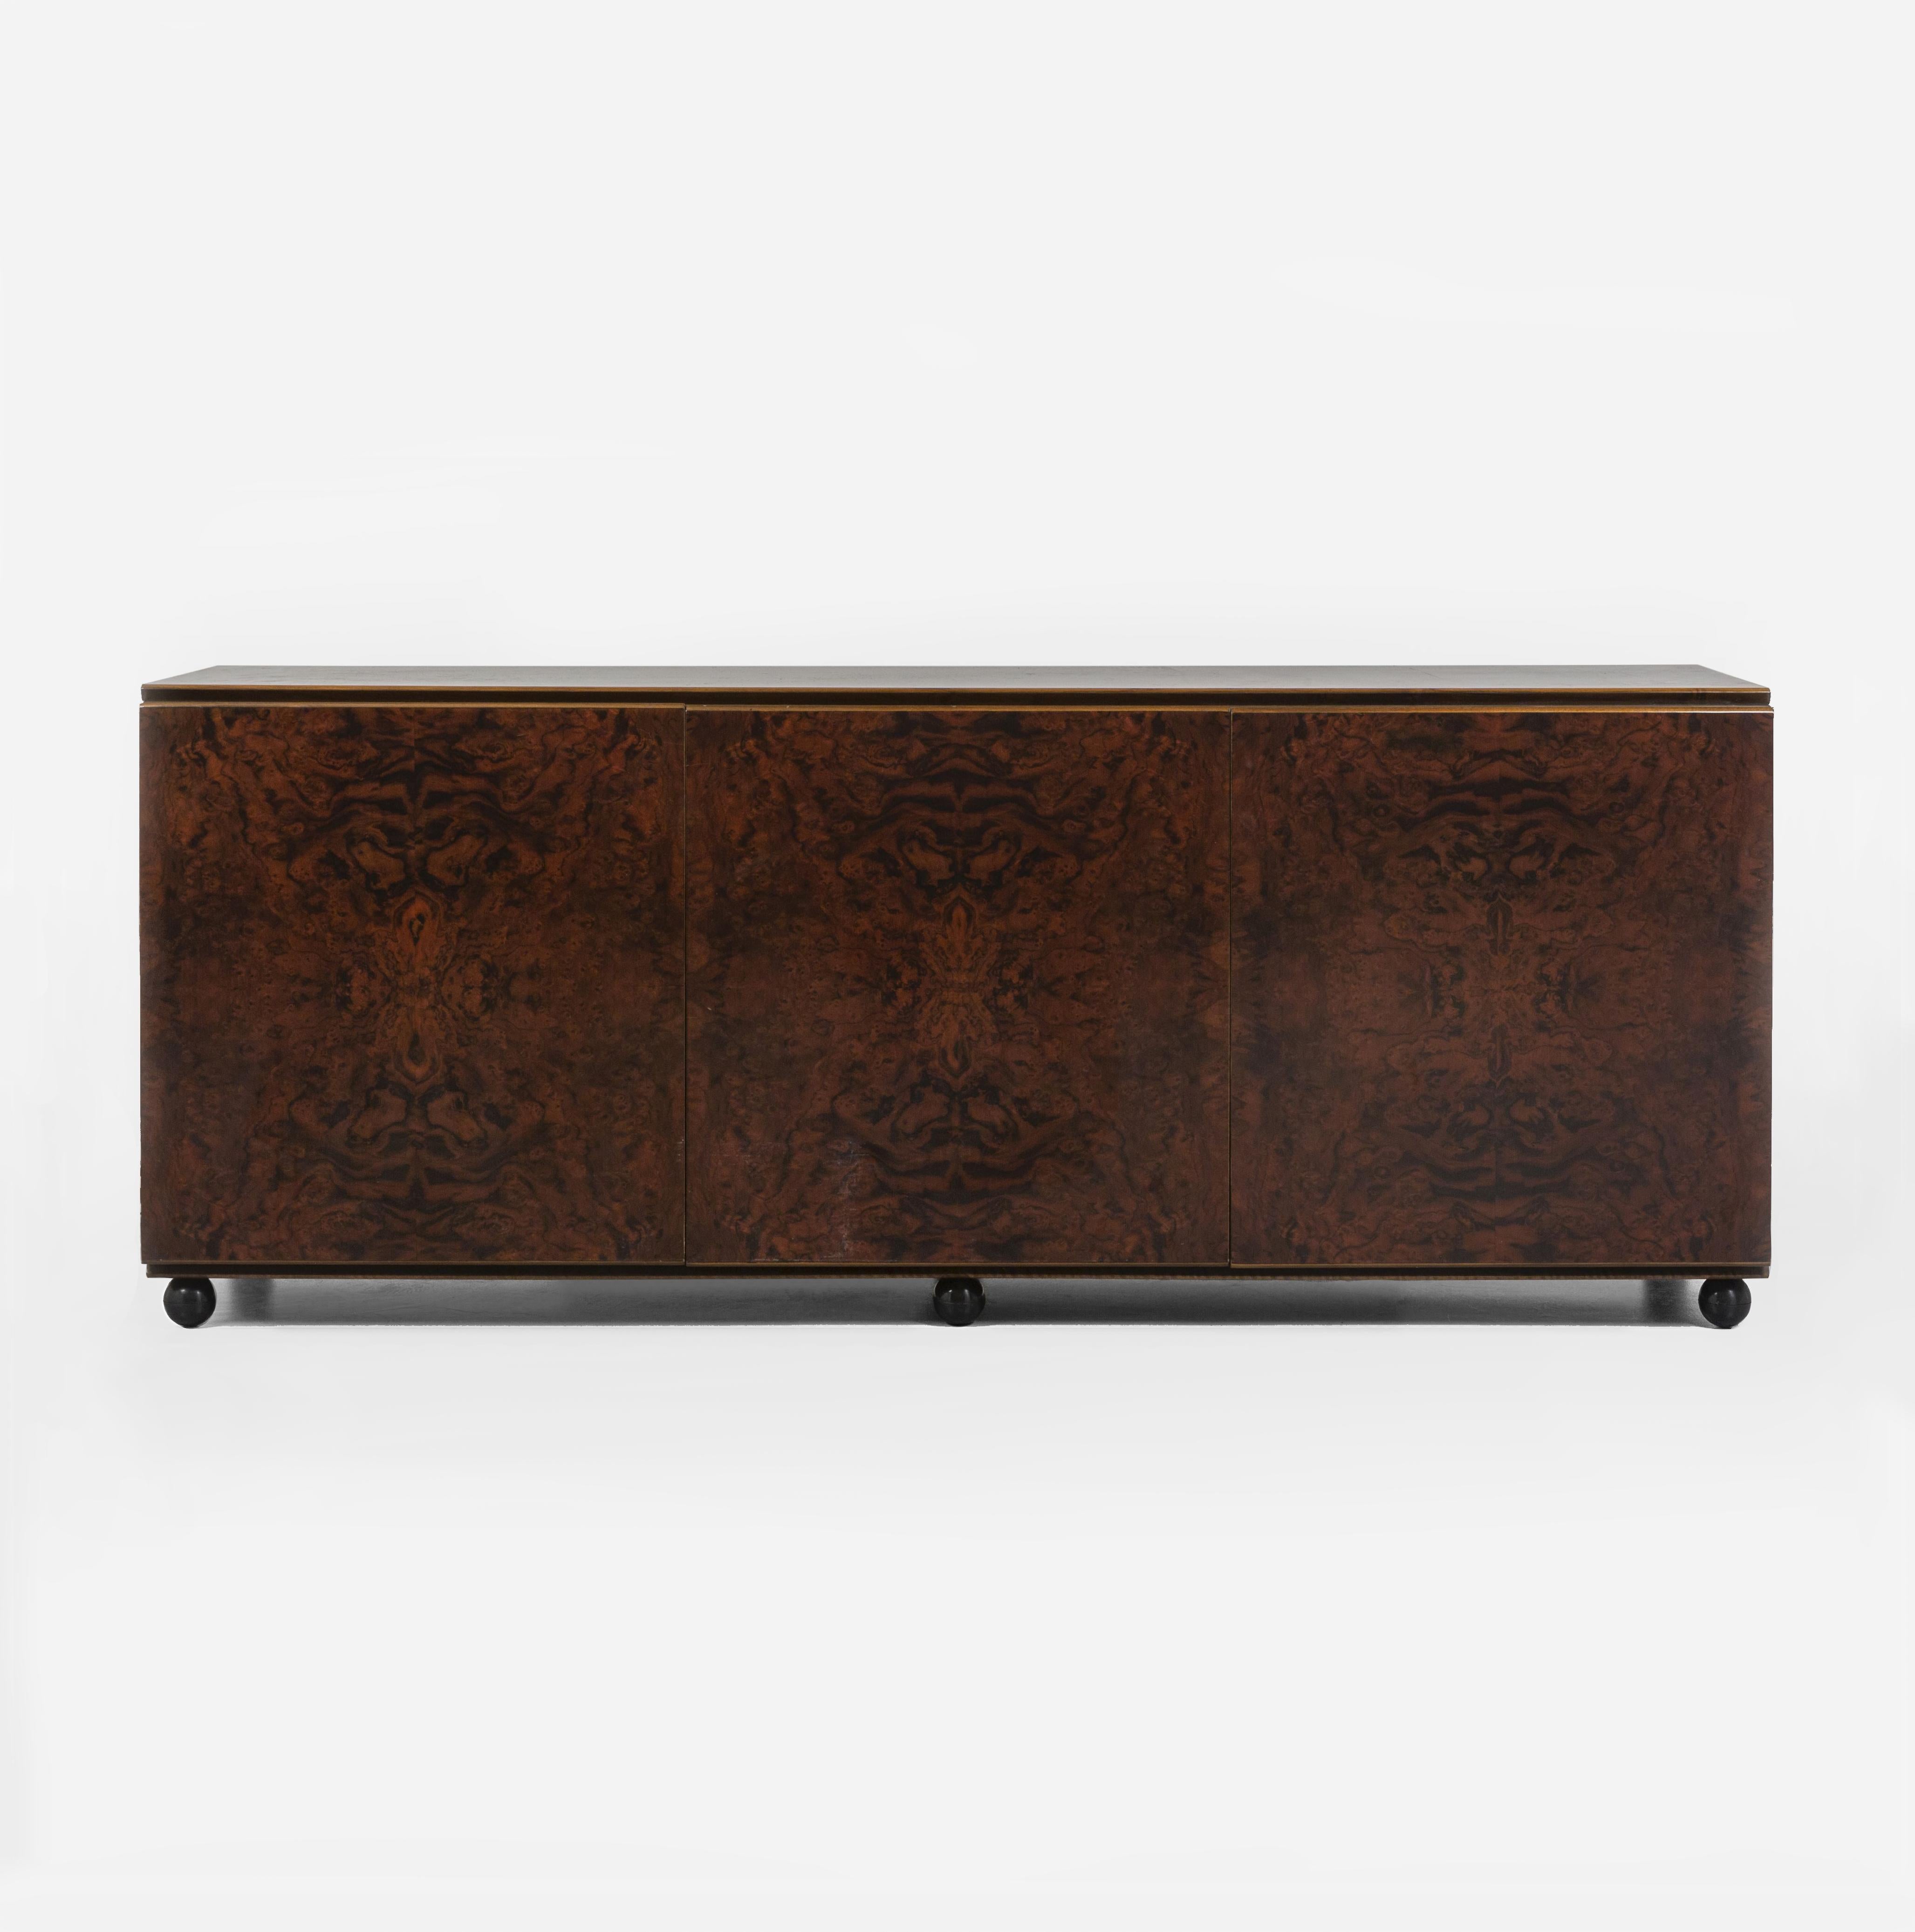 This is a stunning Italian sideboard made in the 1960s. It is made of dark brown burr walnut veneer on the outside (both front and back) and another lighter walnut veneer on the inside. The wood is varnished which makes it really high end. 
It has